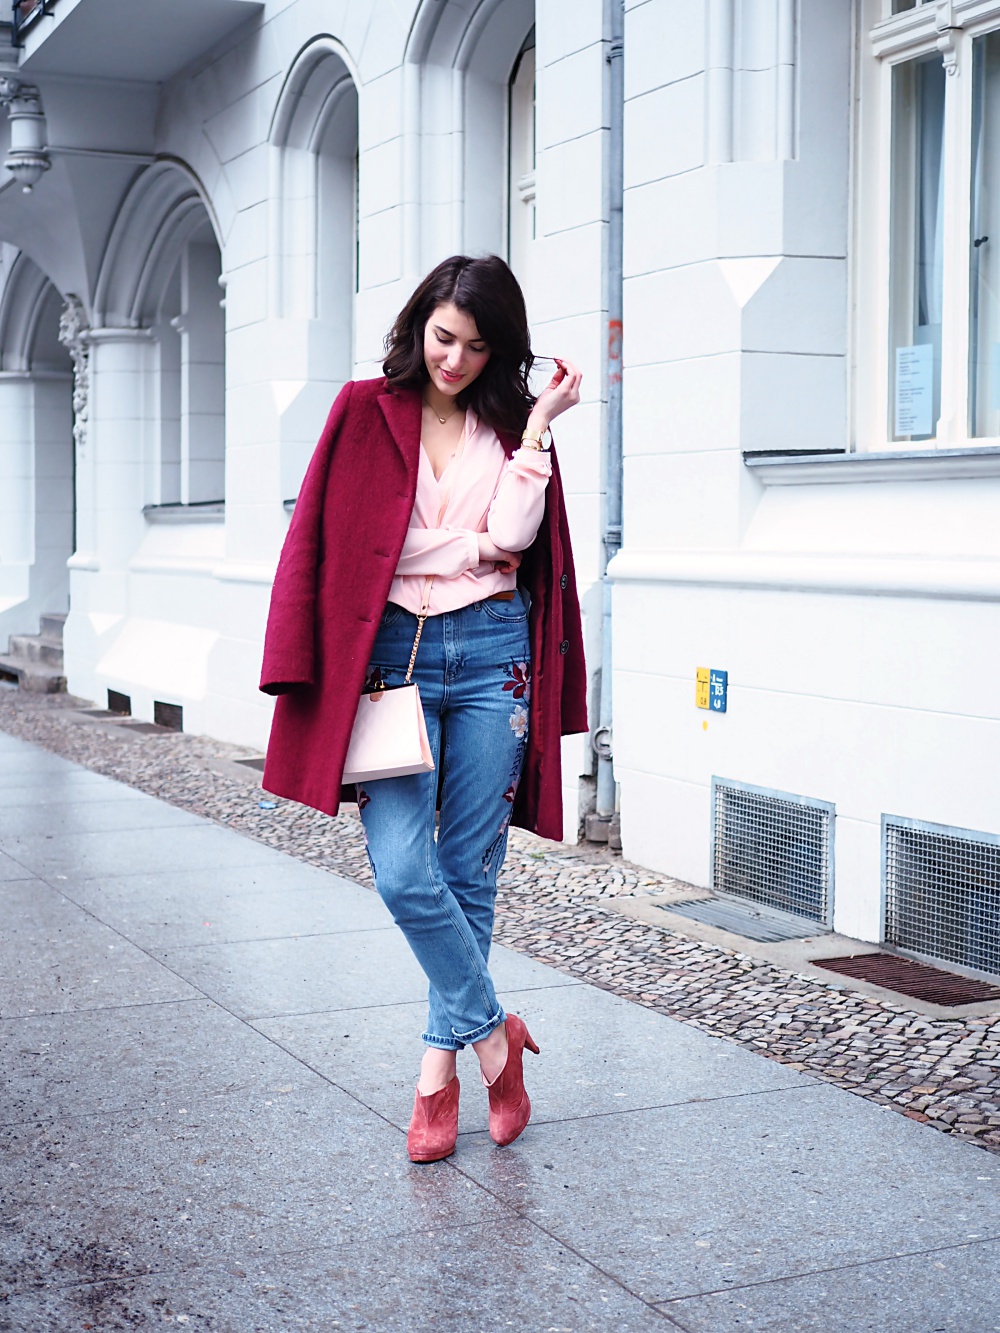 valentine's day outfit look romantic denim date outfit casual streetstyle girly wrapped chiffon blouse toyshop embroidered embroidery gerry weber red coat pink romantic colors berlin blog fashion samieze